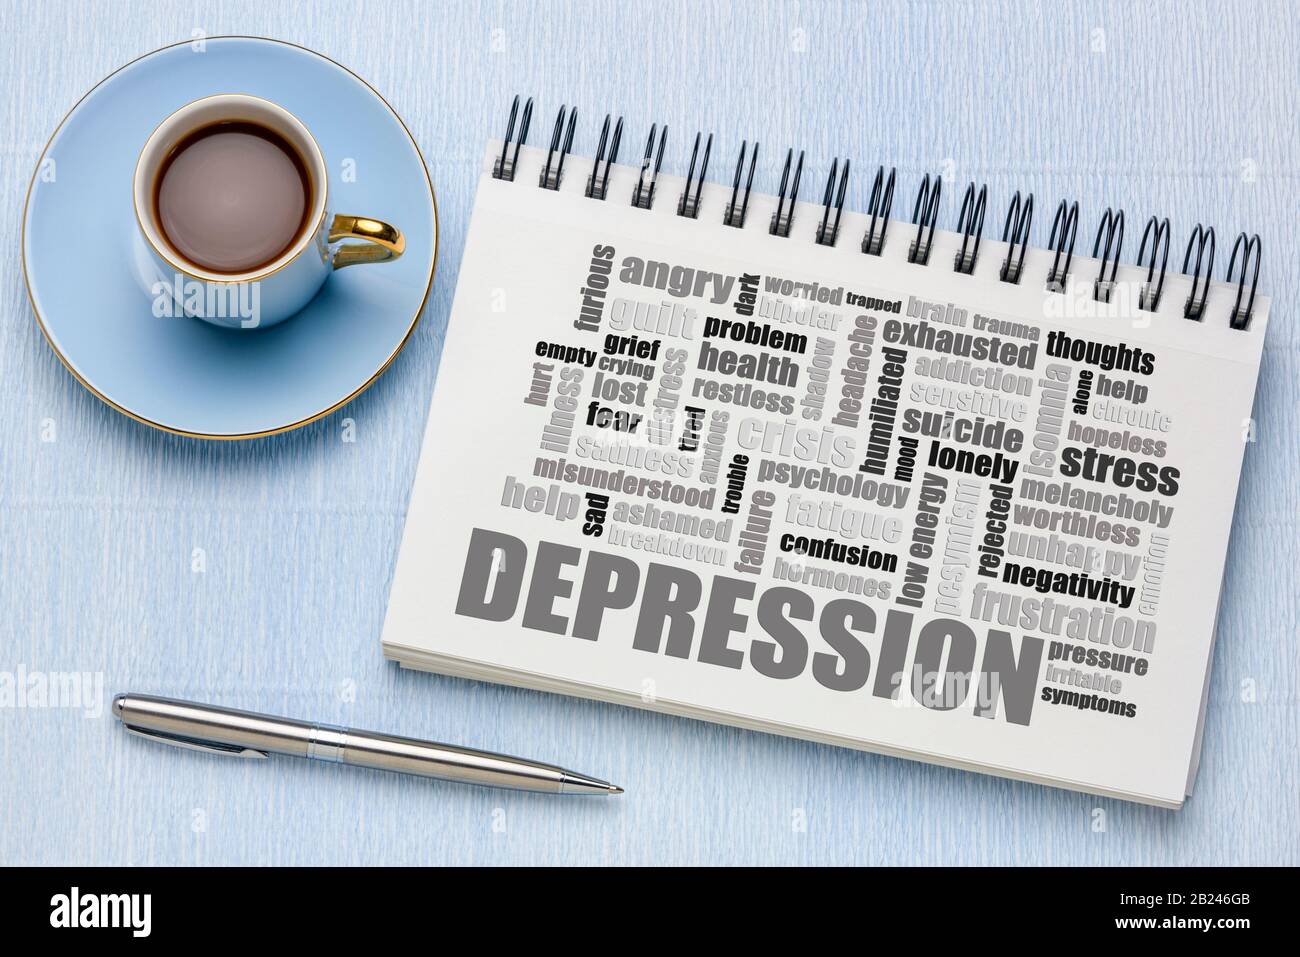 depression word cloud in a sketchbook with a cup of coffee, wellbeing and mental health concept Stock Photo